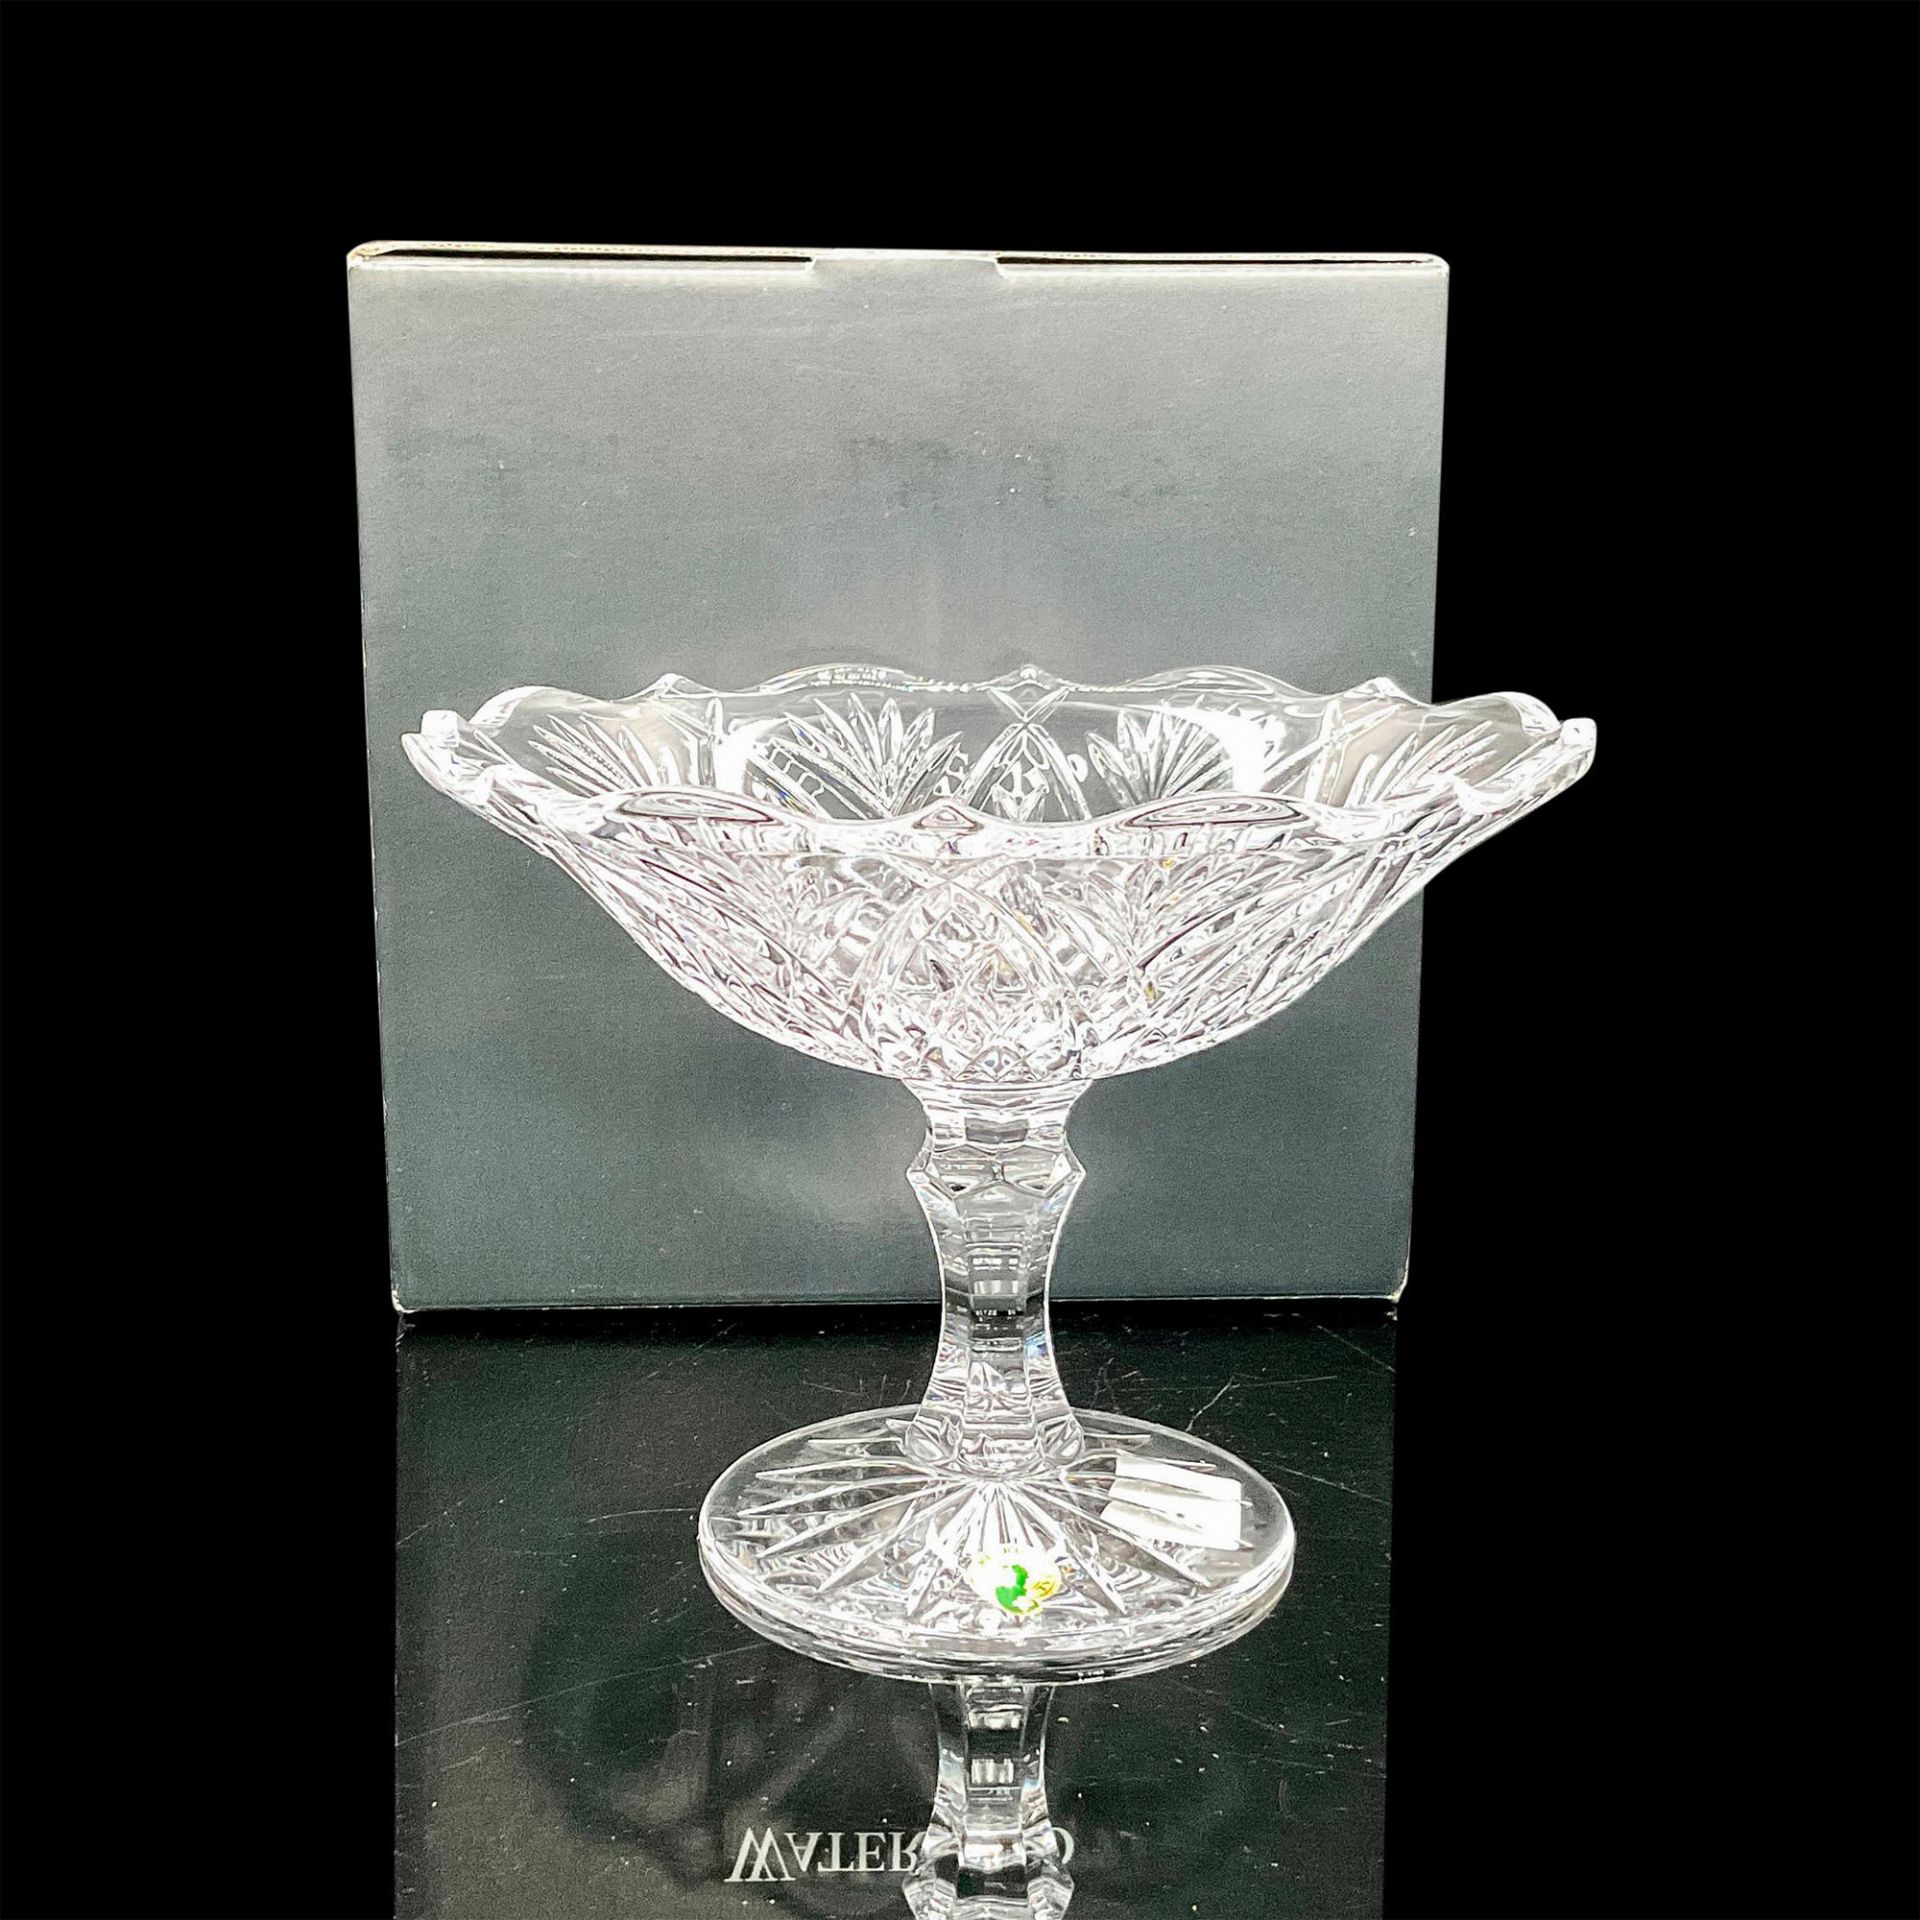 Waterford Crystal Footed Compote Bowl, Dunmore - Image 4 of 4